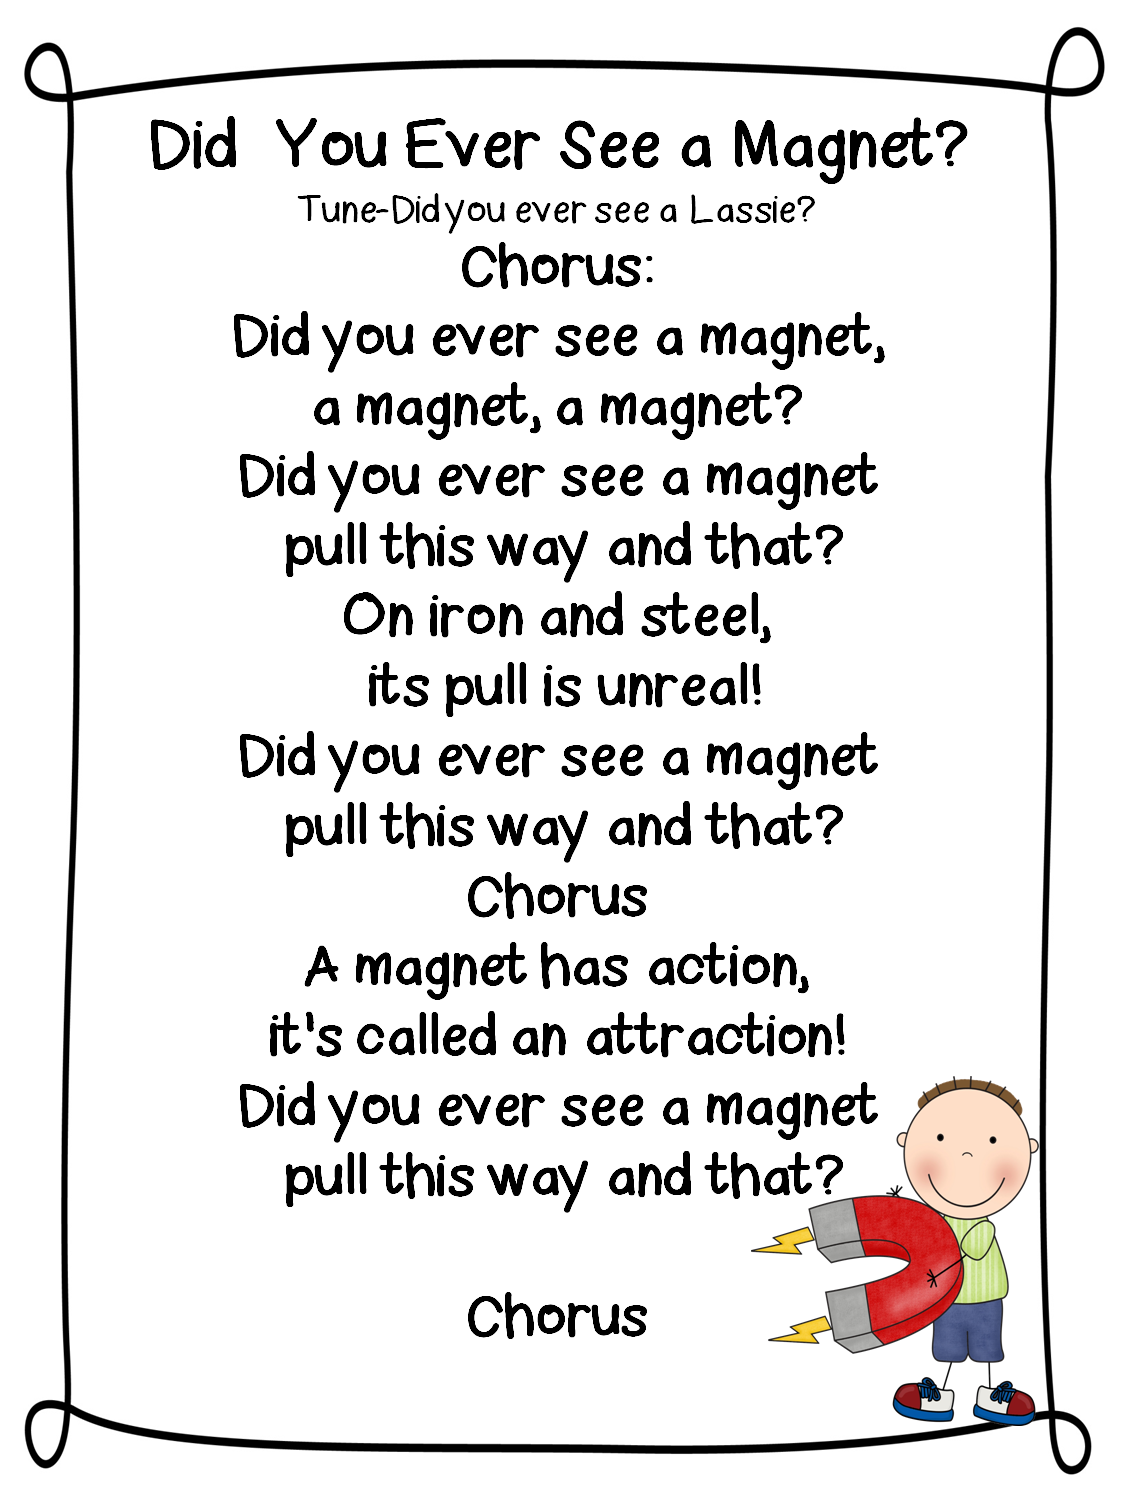 you heard the Song? | Dowling Magnets